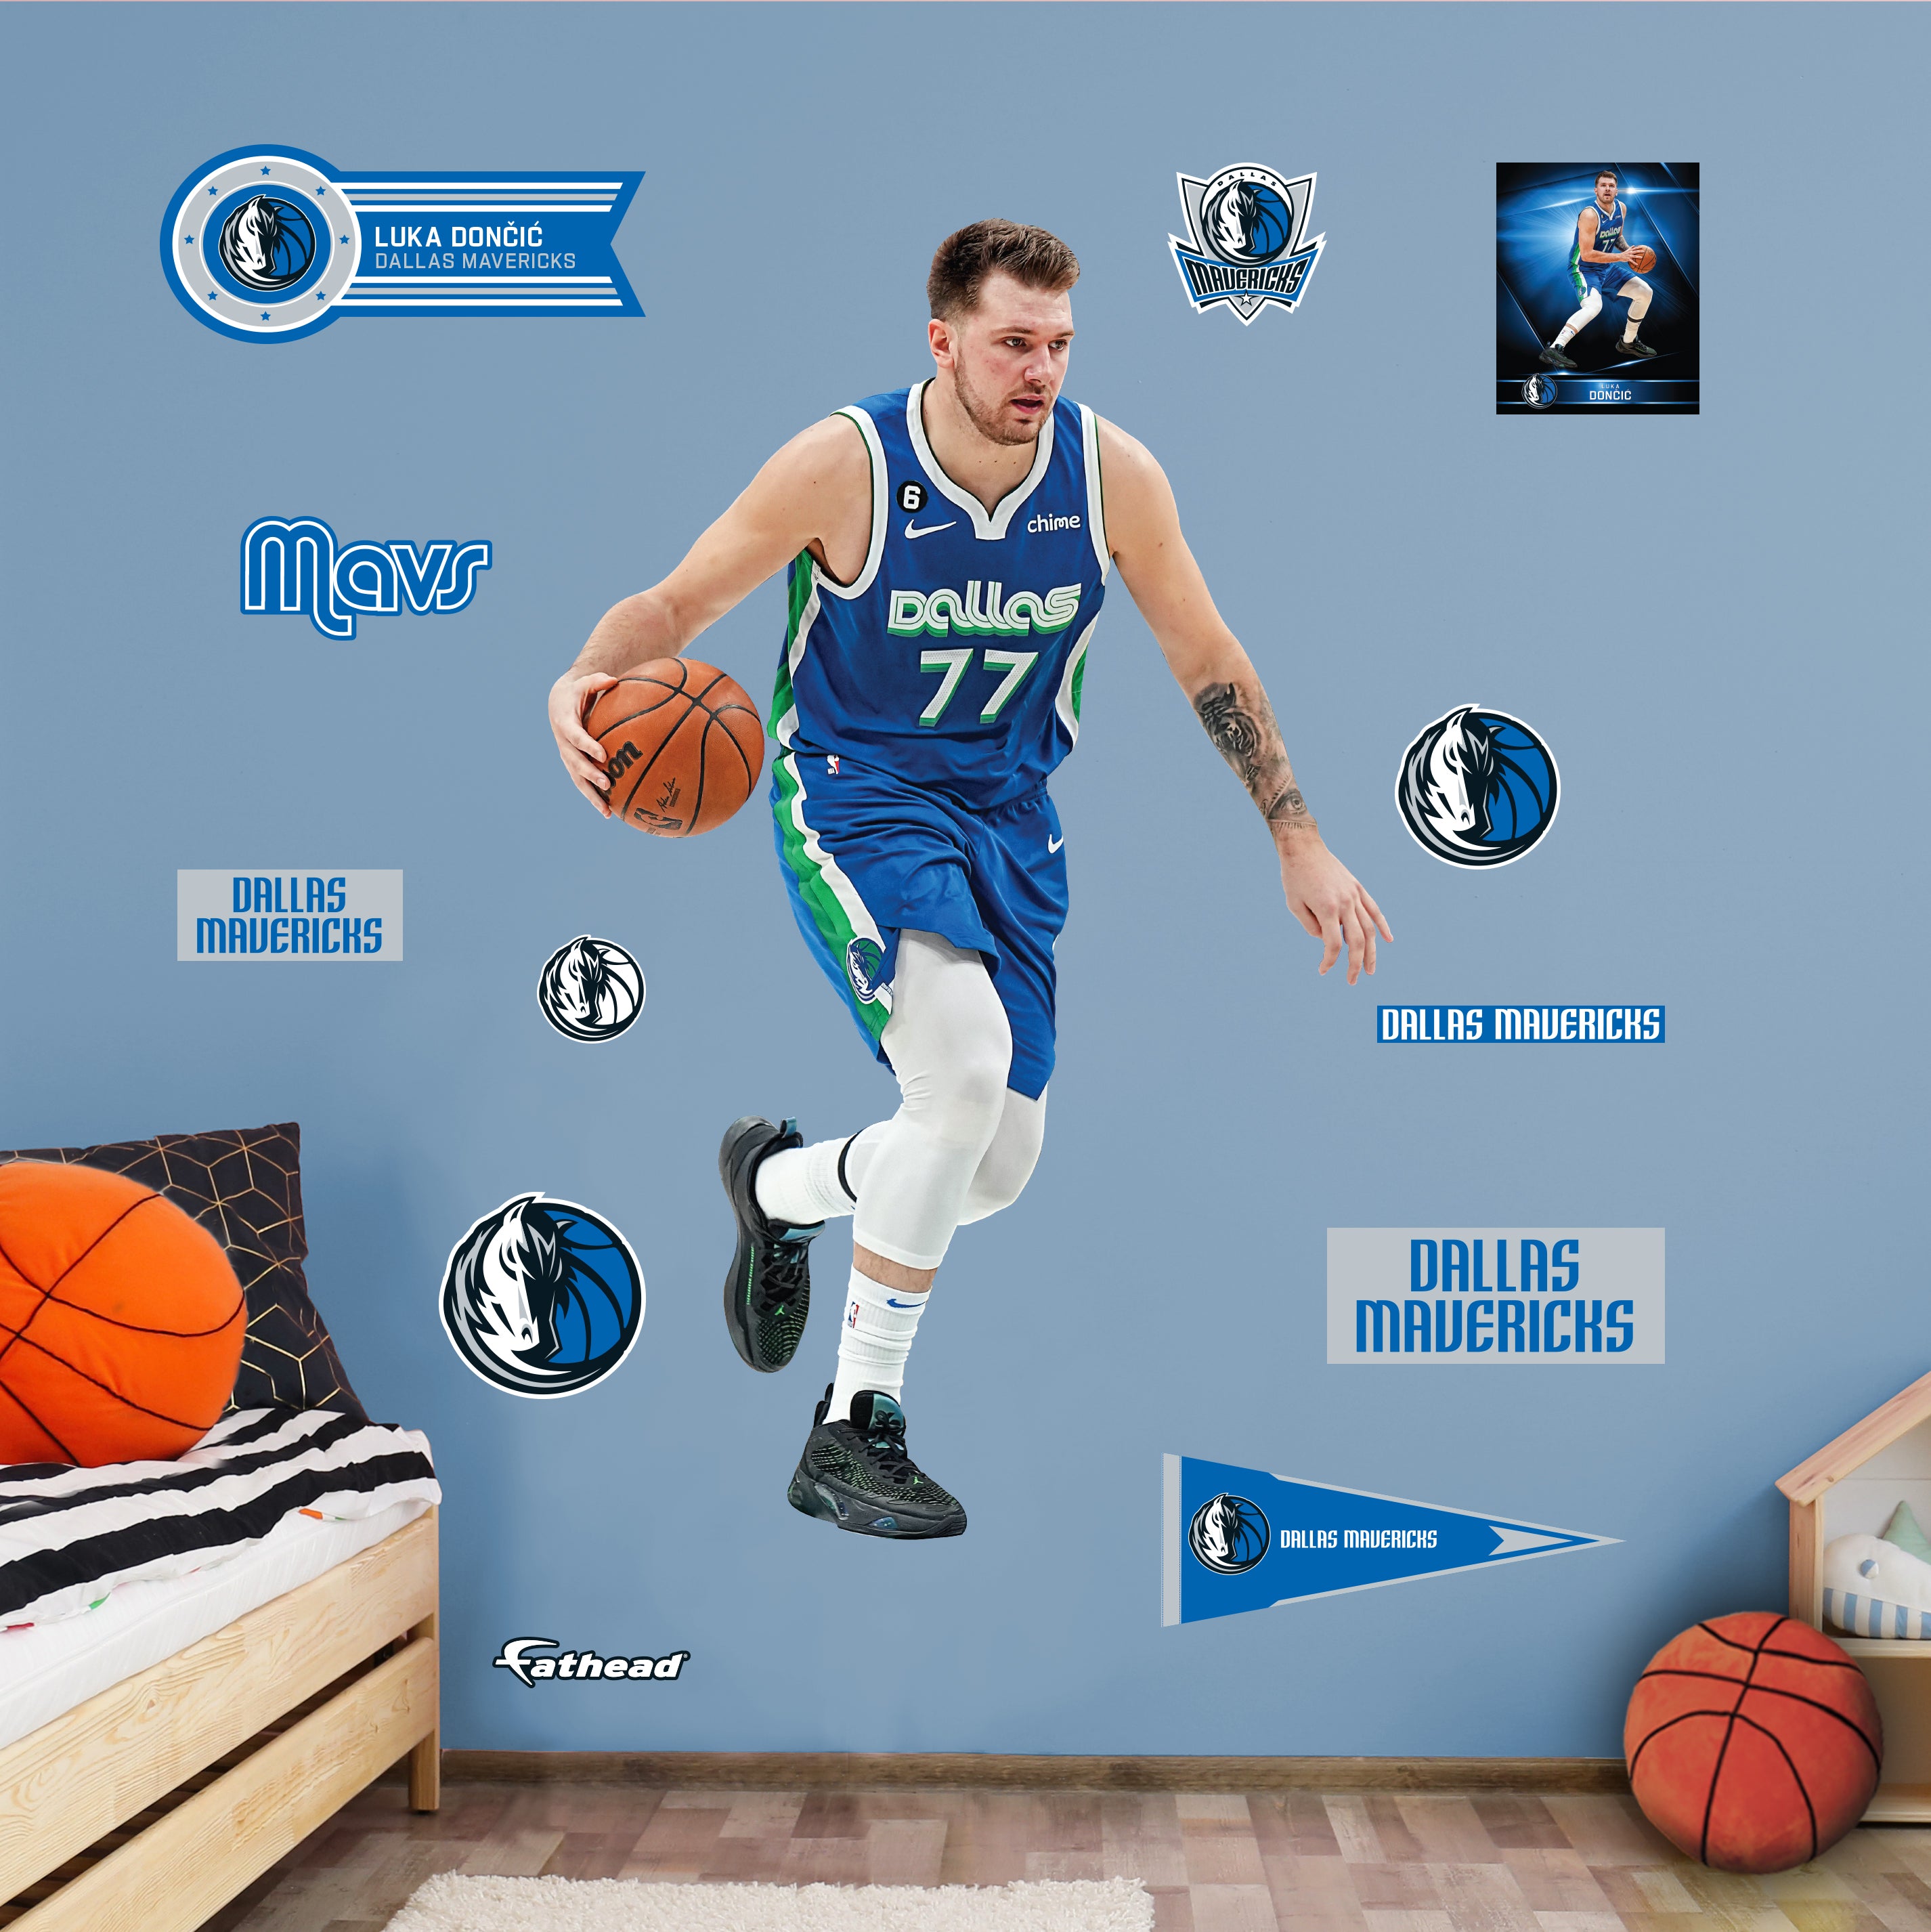 Luka Doncic Wallpaper Posters for Sale